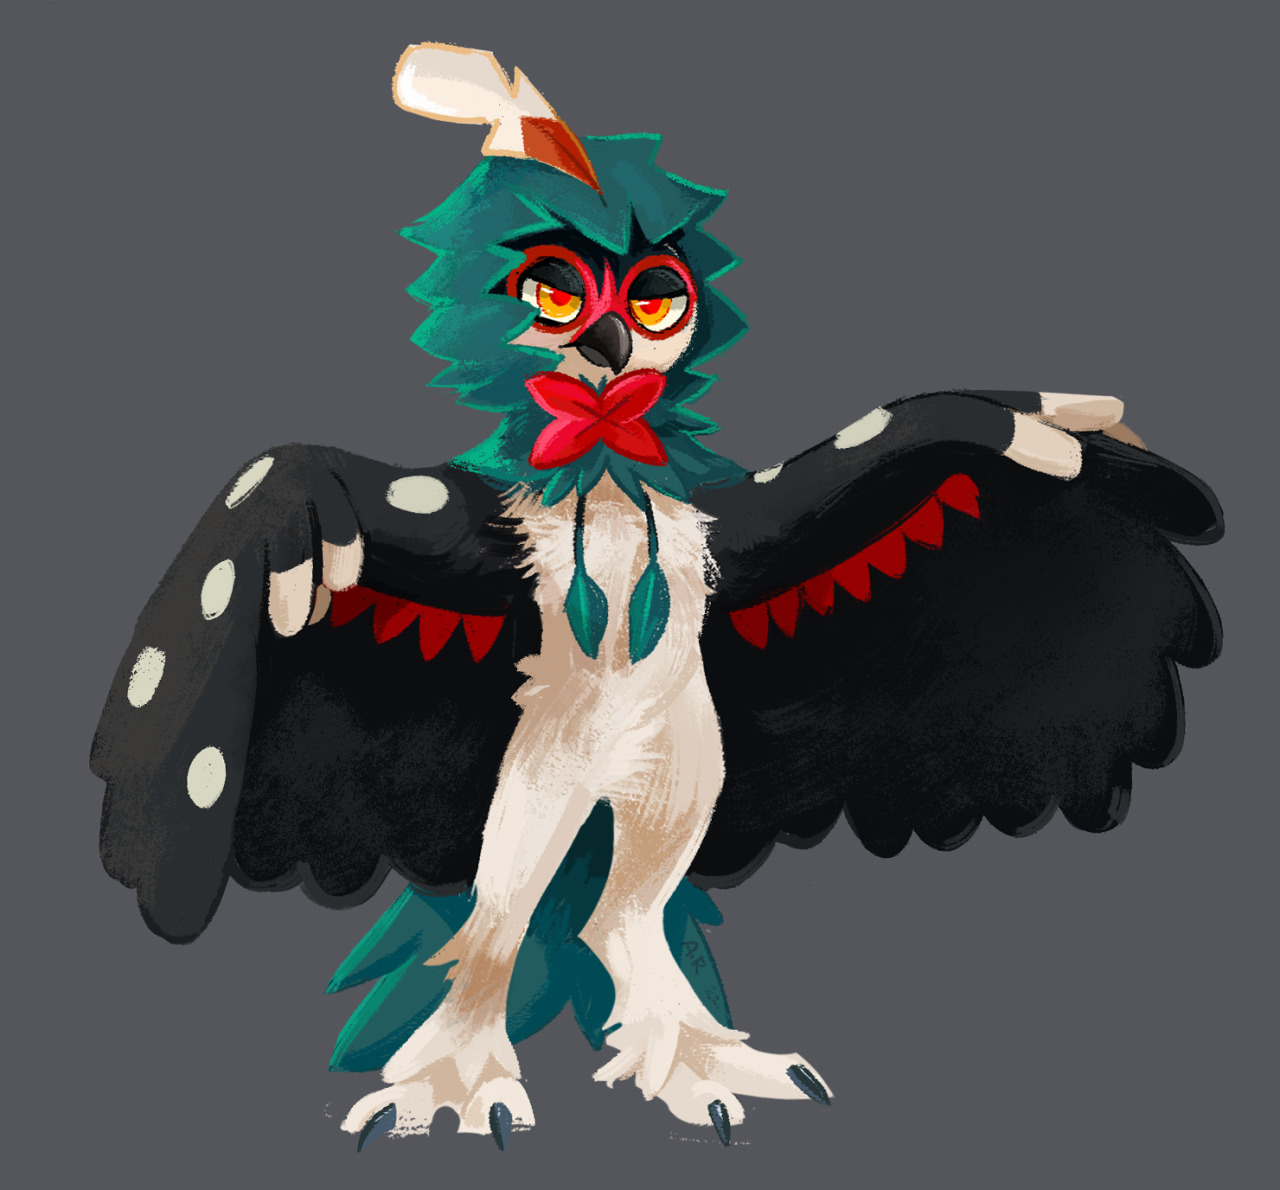 i cant believe my favourite mon is from gen 7 but here we are #alola was good tbh i liked it #pokemon#decidueye